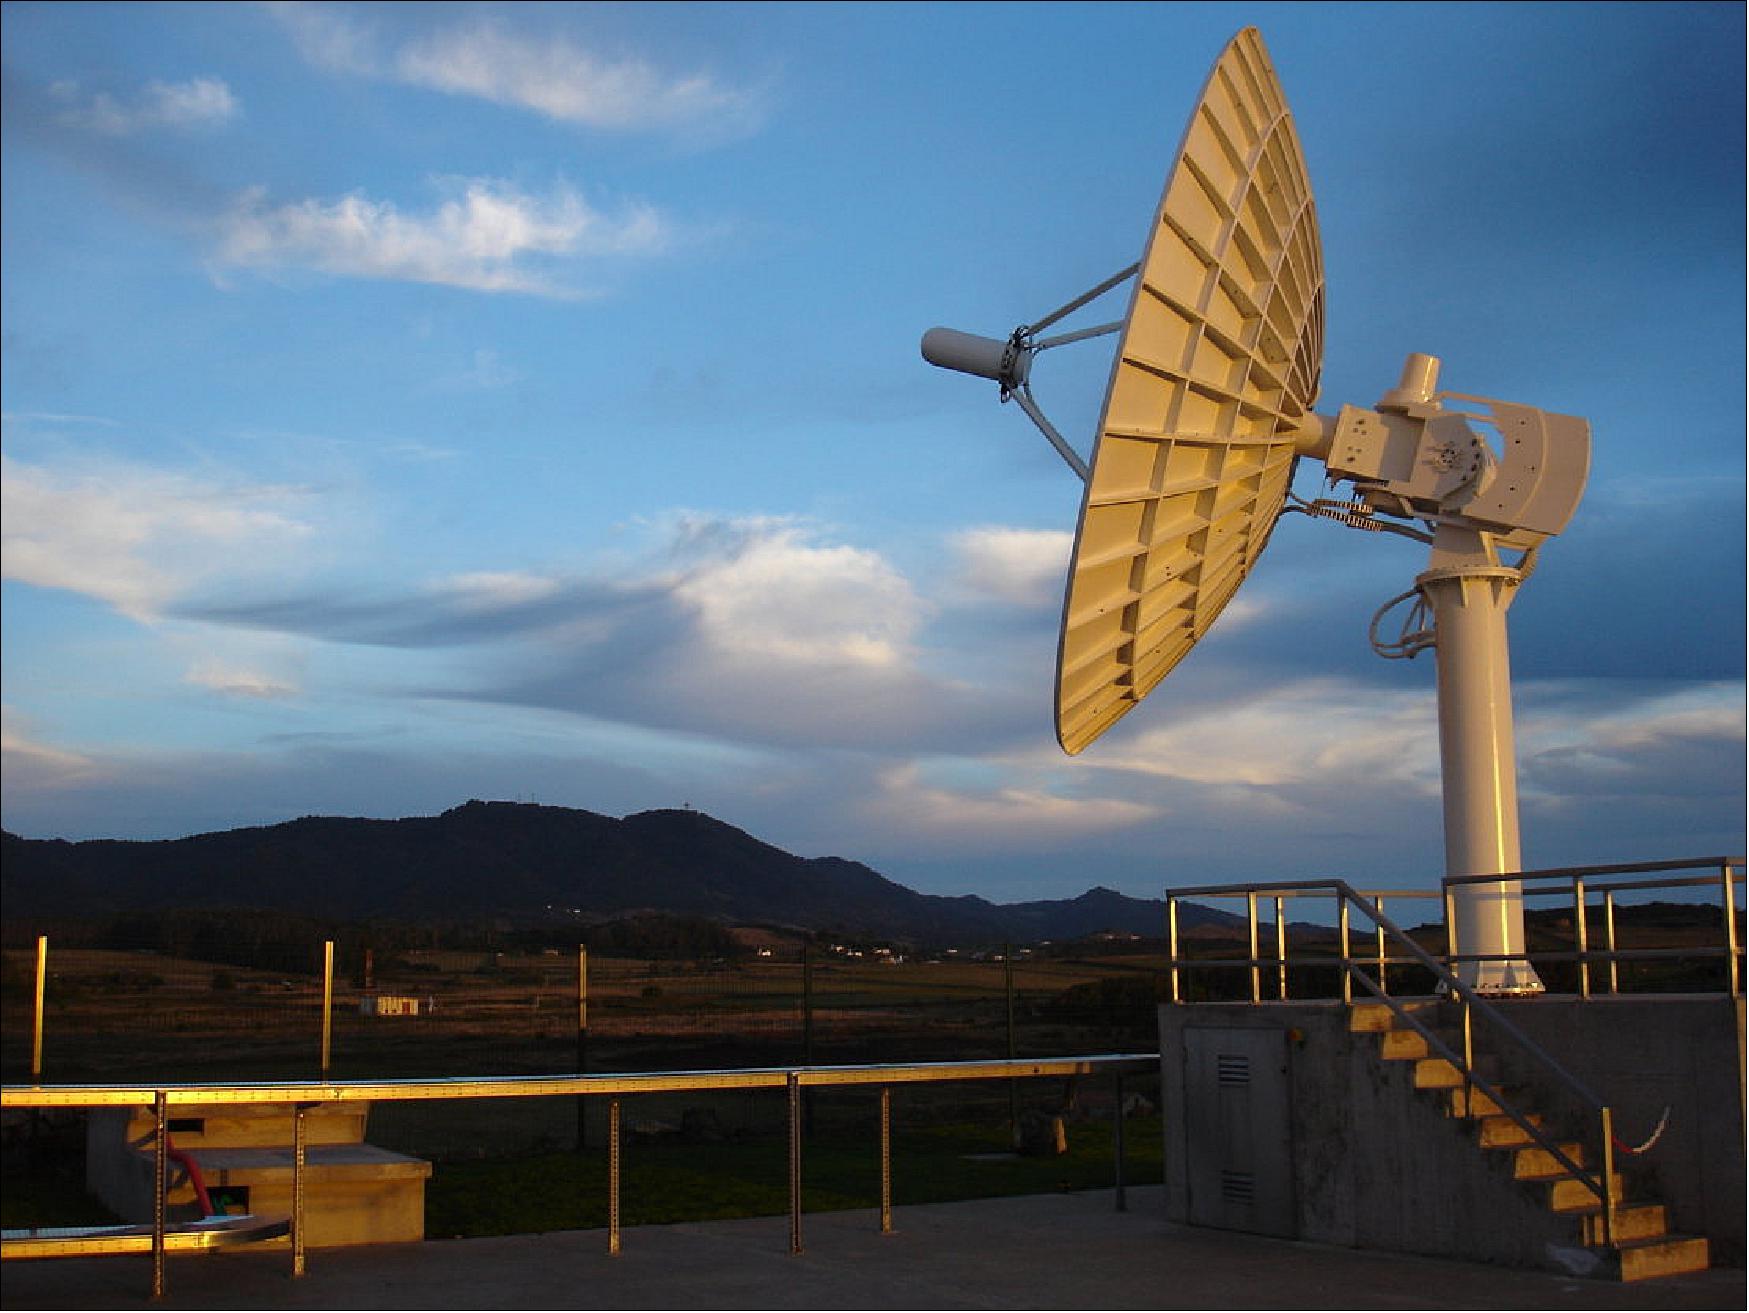 Figure 19: ESA's Santa Maria ground station is located on the ‘Montes das Flores’ (Hill of Flowers) on Santa Maria island in Portugal's mid-Atlantic Azores. It includes a Galileo Sensor Station (image credit: ESA)